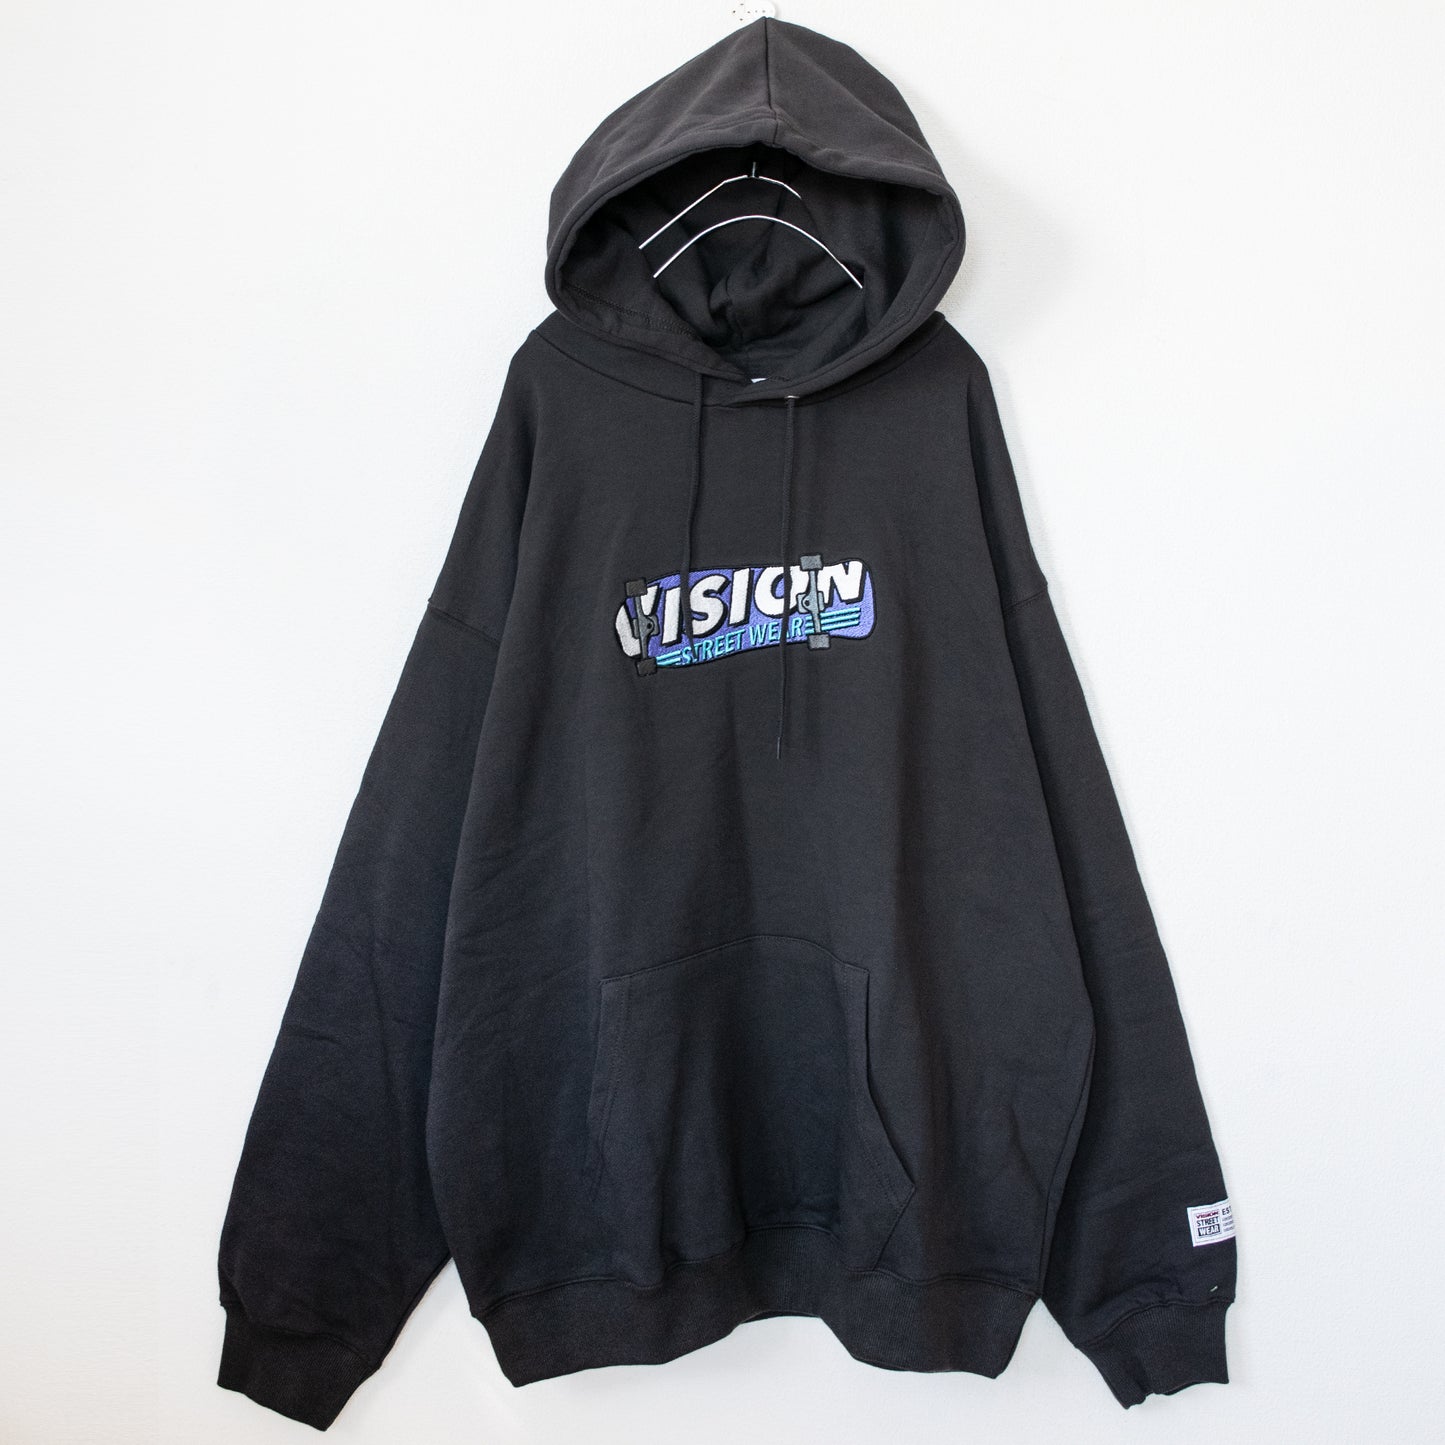 VISION STREET WEAR Skateboard Logo Print Pullover Hoodie - YOUAREMYPOISON